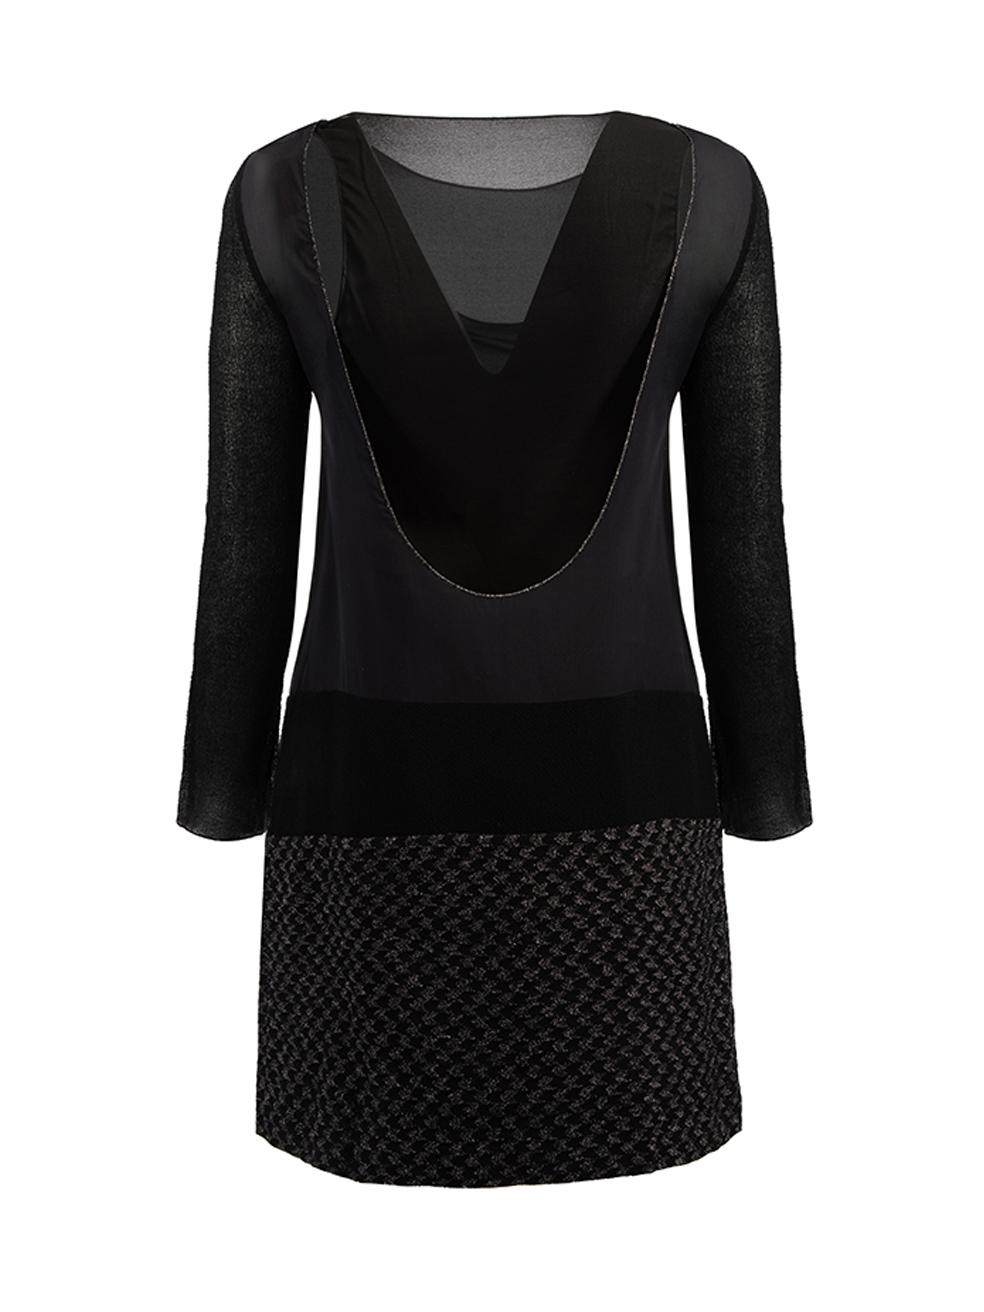 Pre-Loved Missoni Women's Black Mesh Layered Houndstooth Panel Dress In Excellent Condition For Sale In London, GB